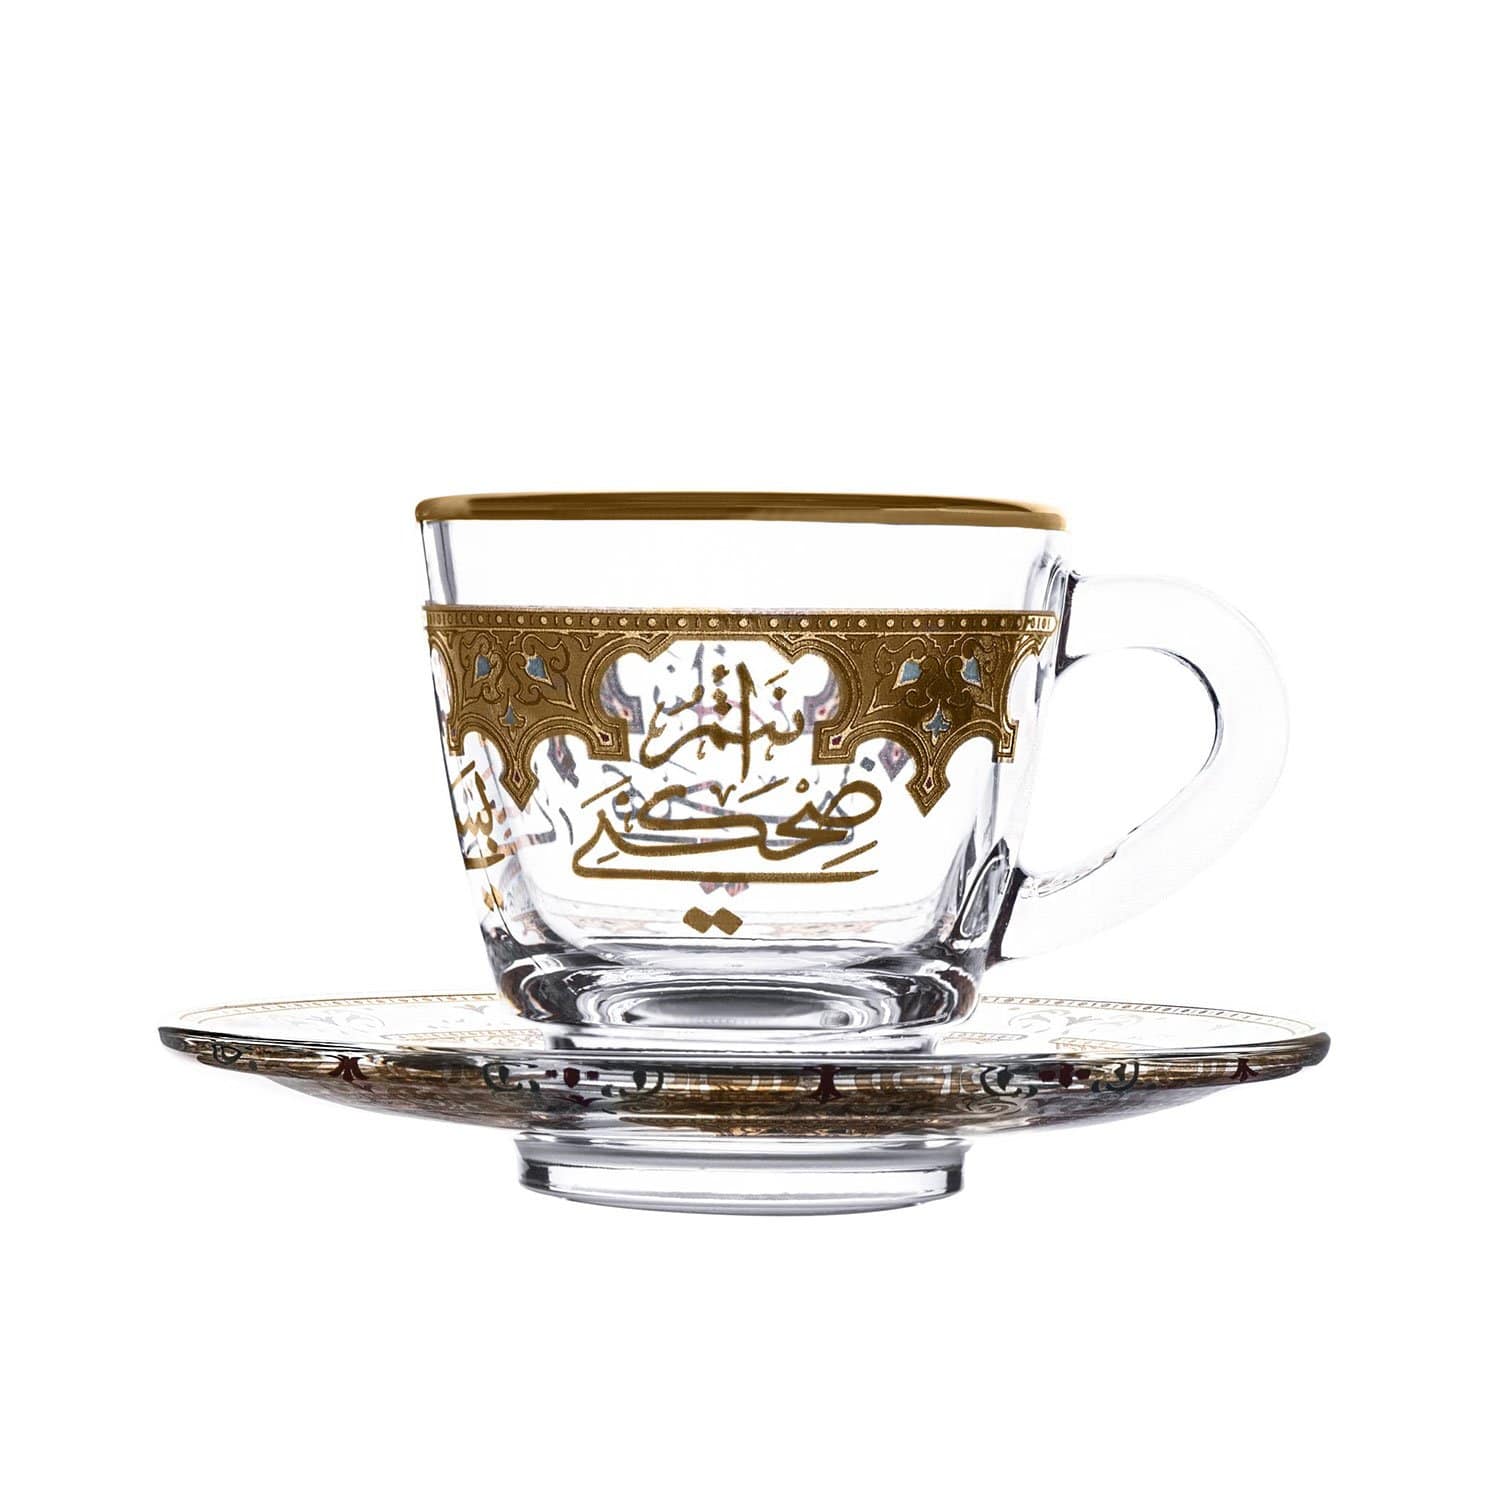 DIMLAJ SUROOR 12PC COFFEE CUP AND SAUCER GOLD - 46994